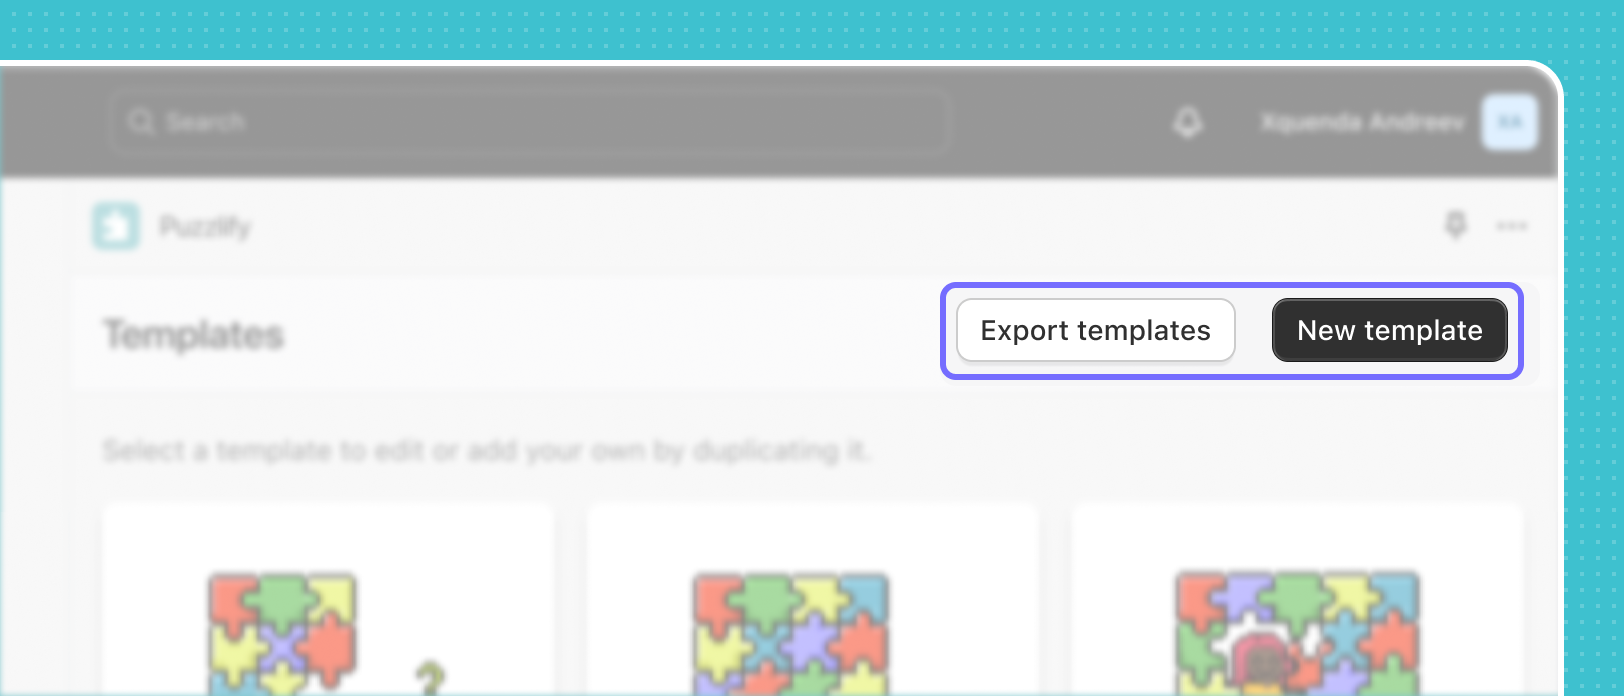 The page header with a primary button labeled ‘New template’ and a secondary button labeled ‘Export templates’ in focus.